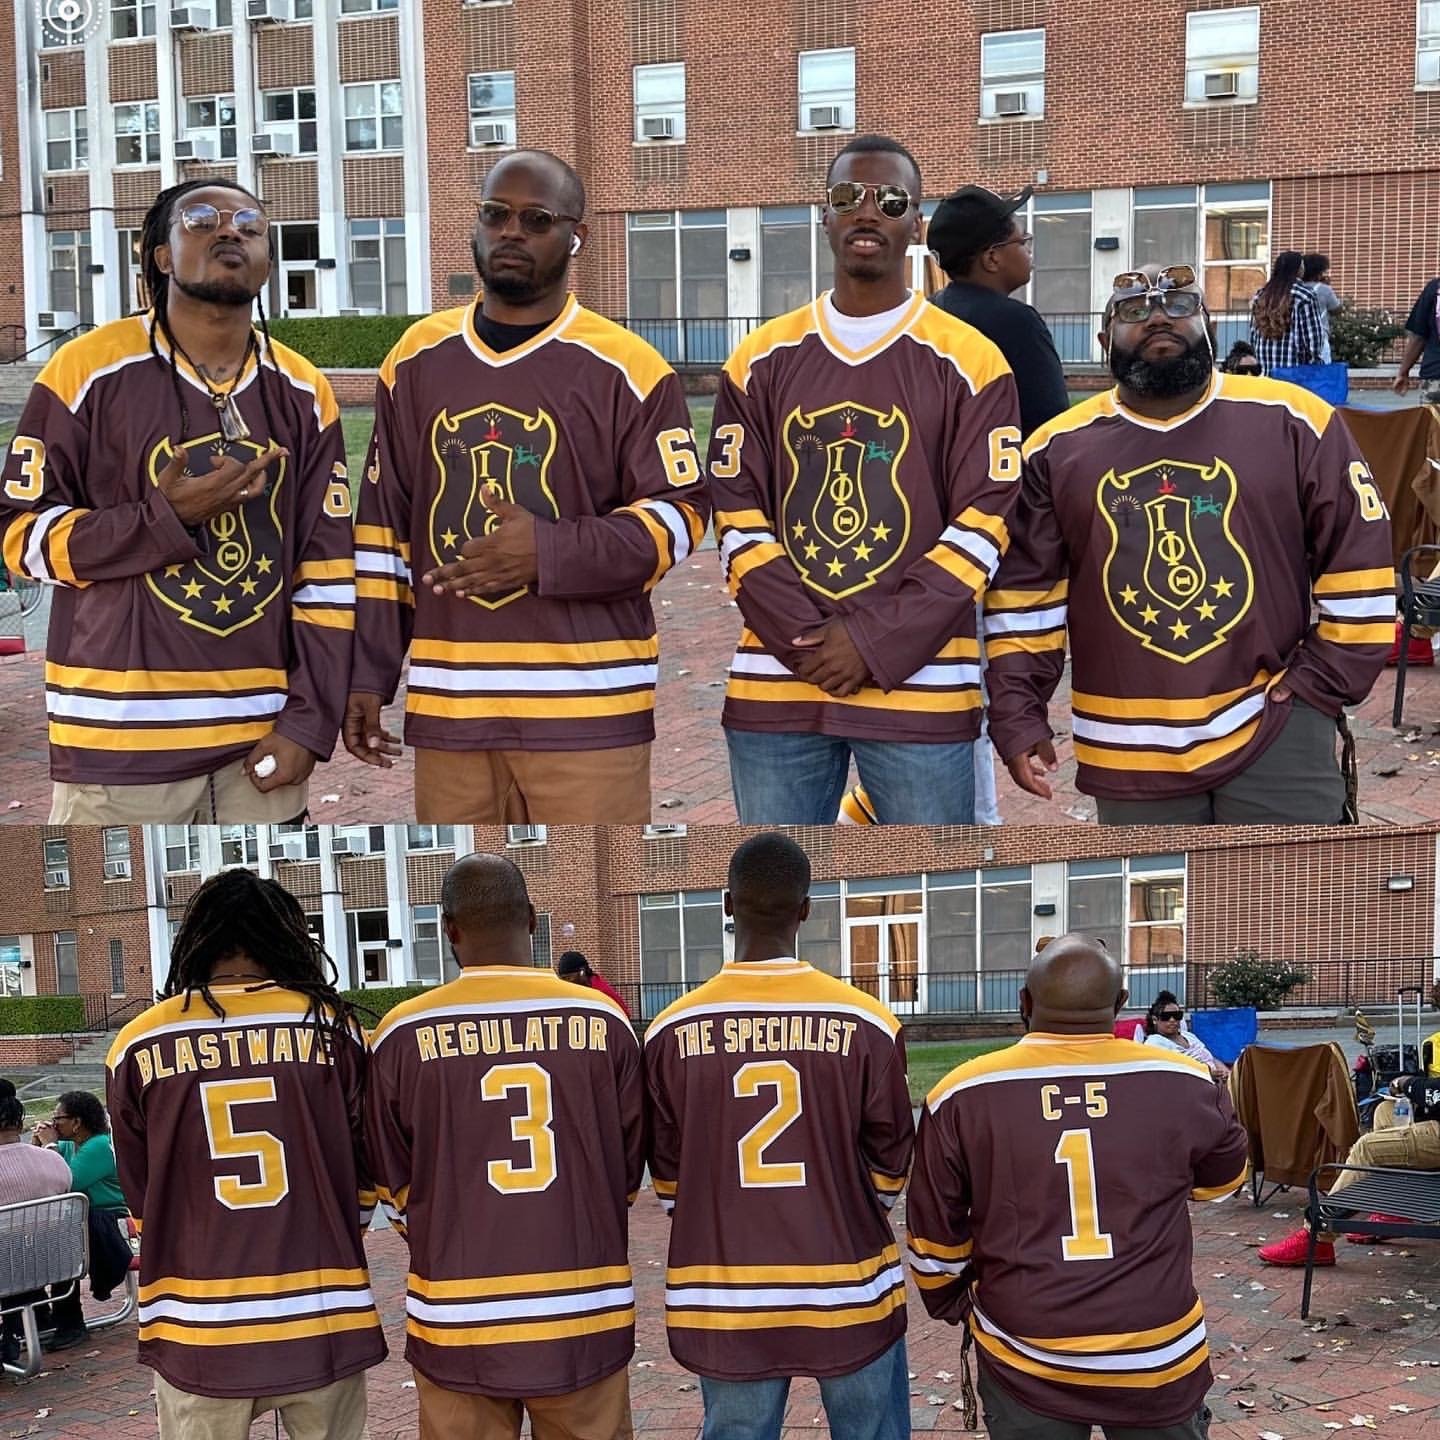 Spring 2010 AE at NCCU Homecoming. Now AEO brothers.